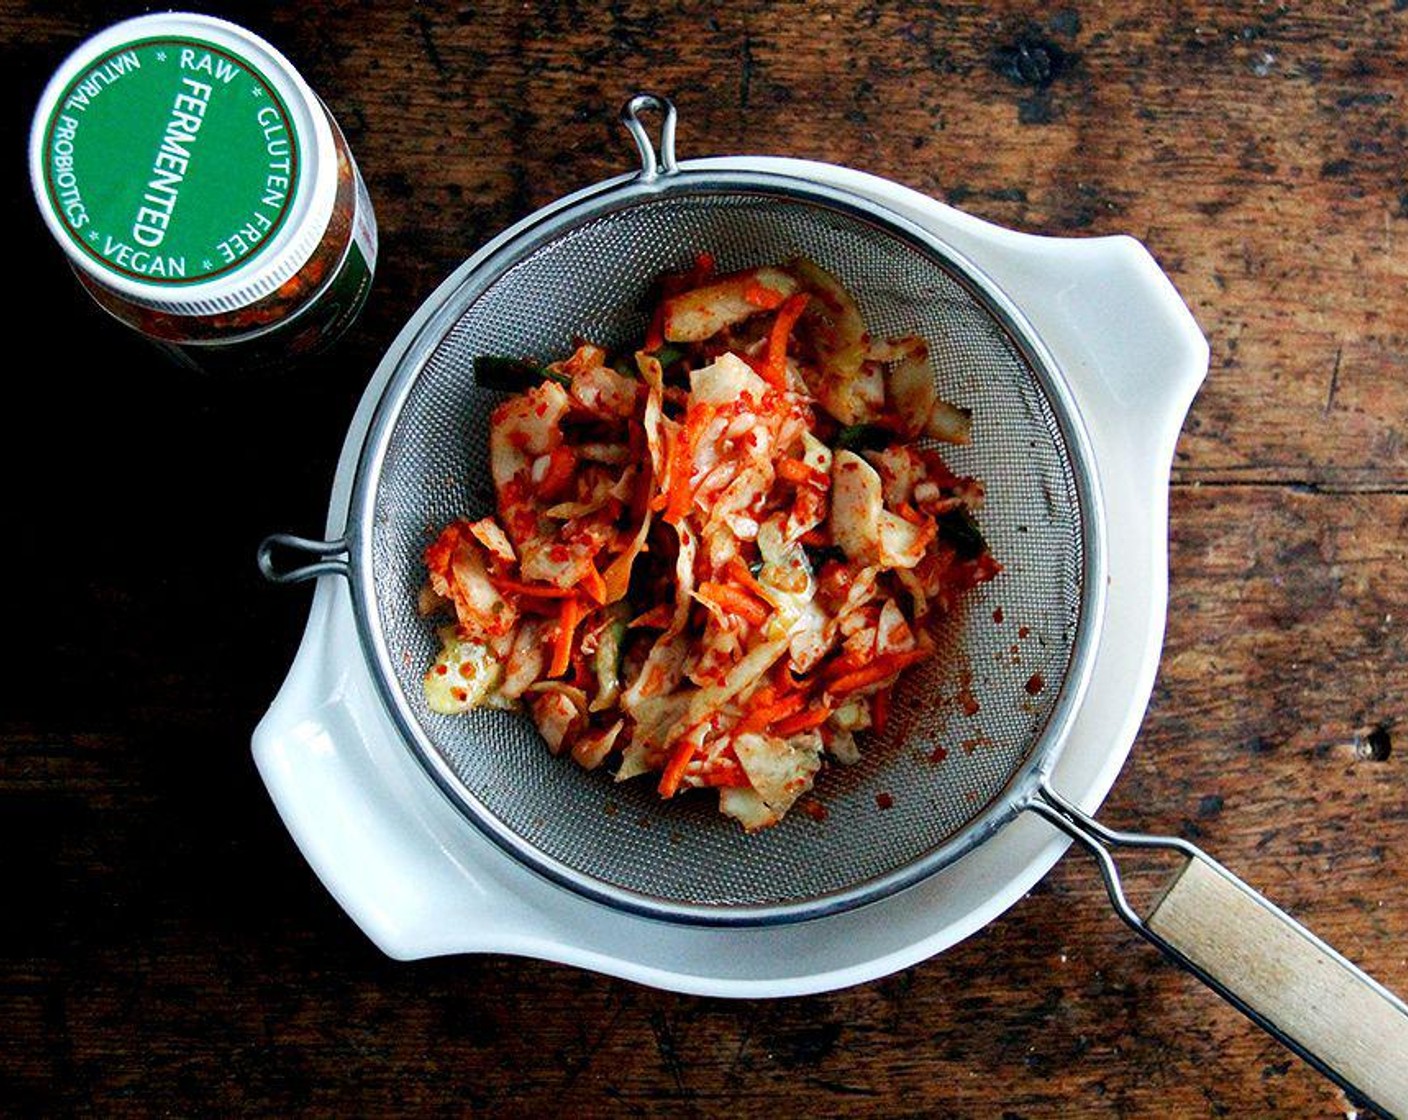 step 1 Drain Vegan Kimchi (1 jar) in a colander or sieve, reserving the liquid. If necessary, chop the kimchi.